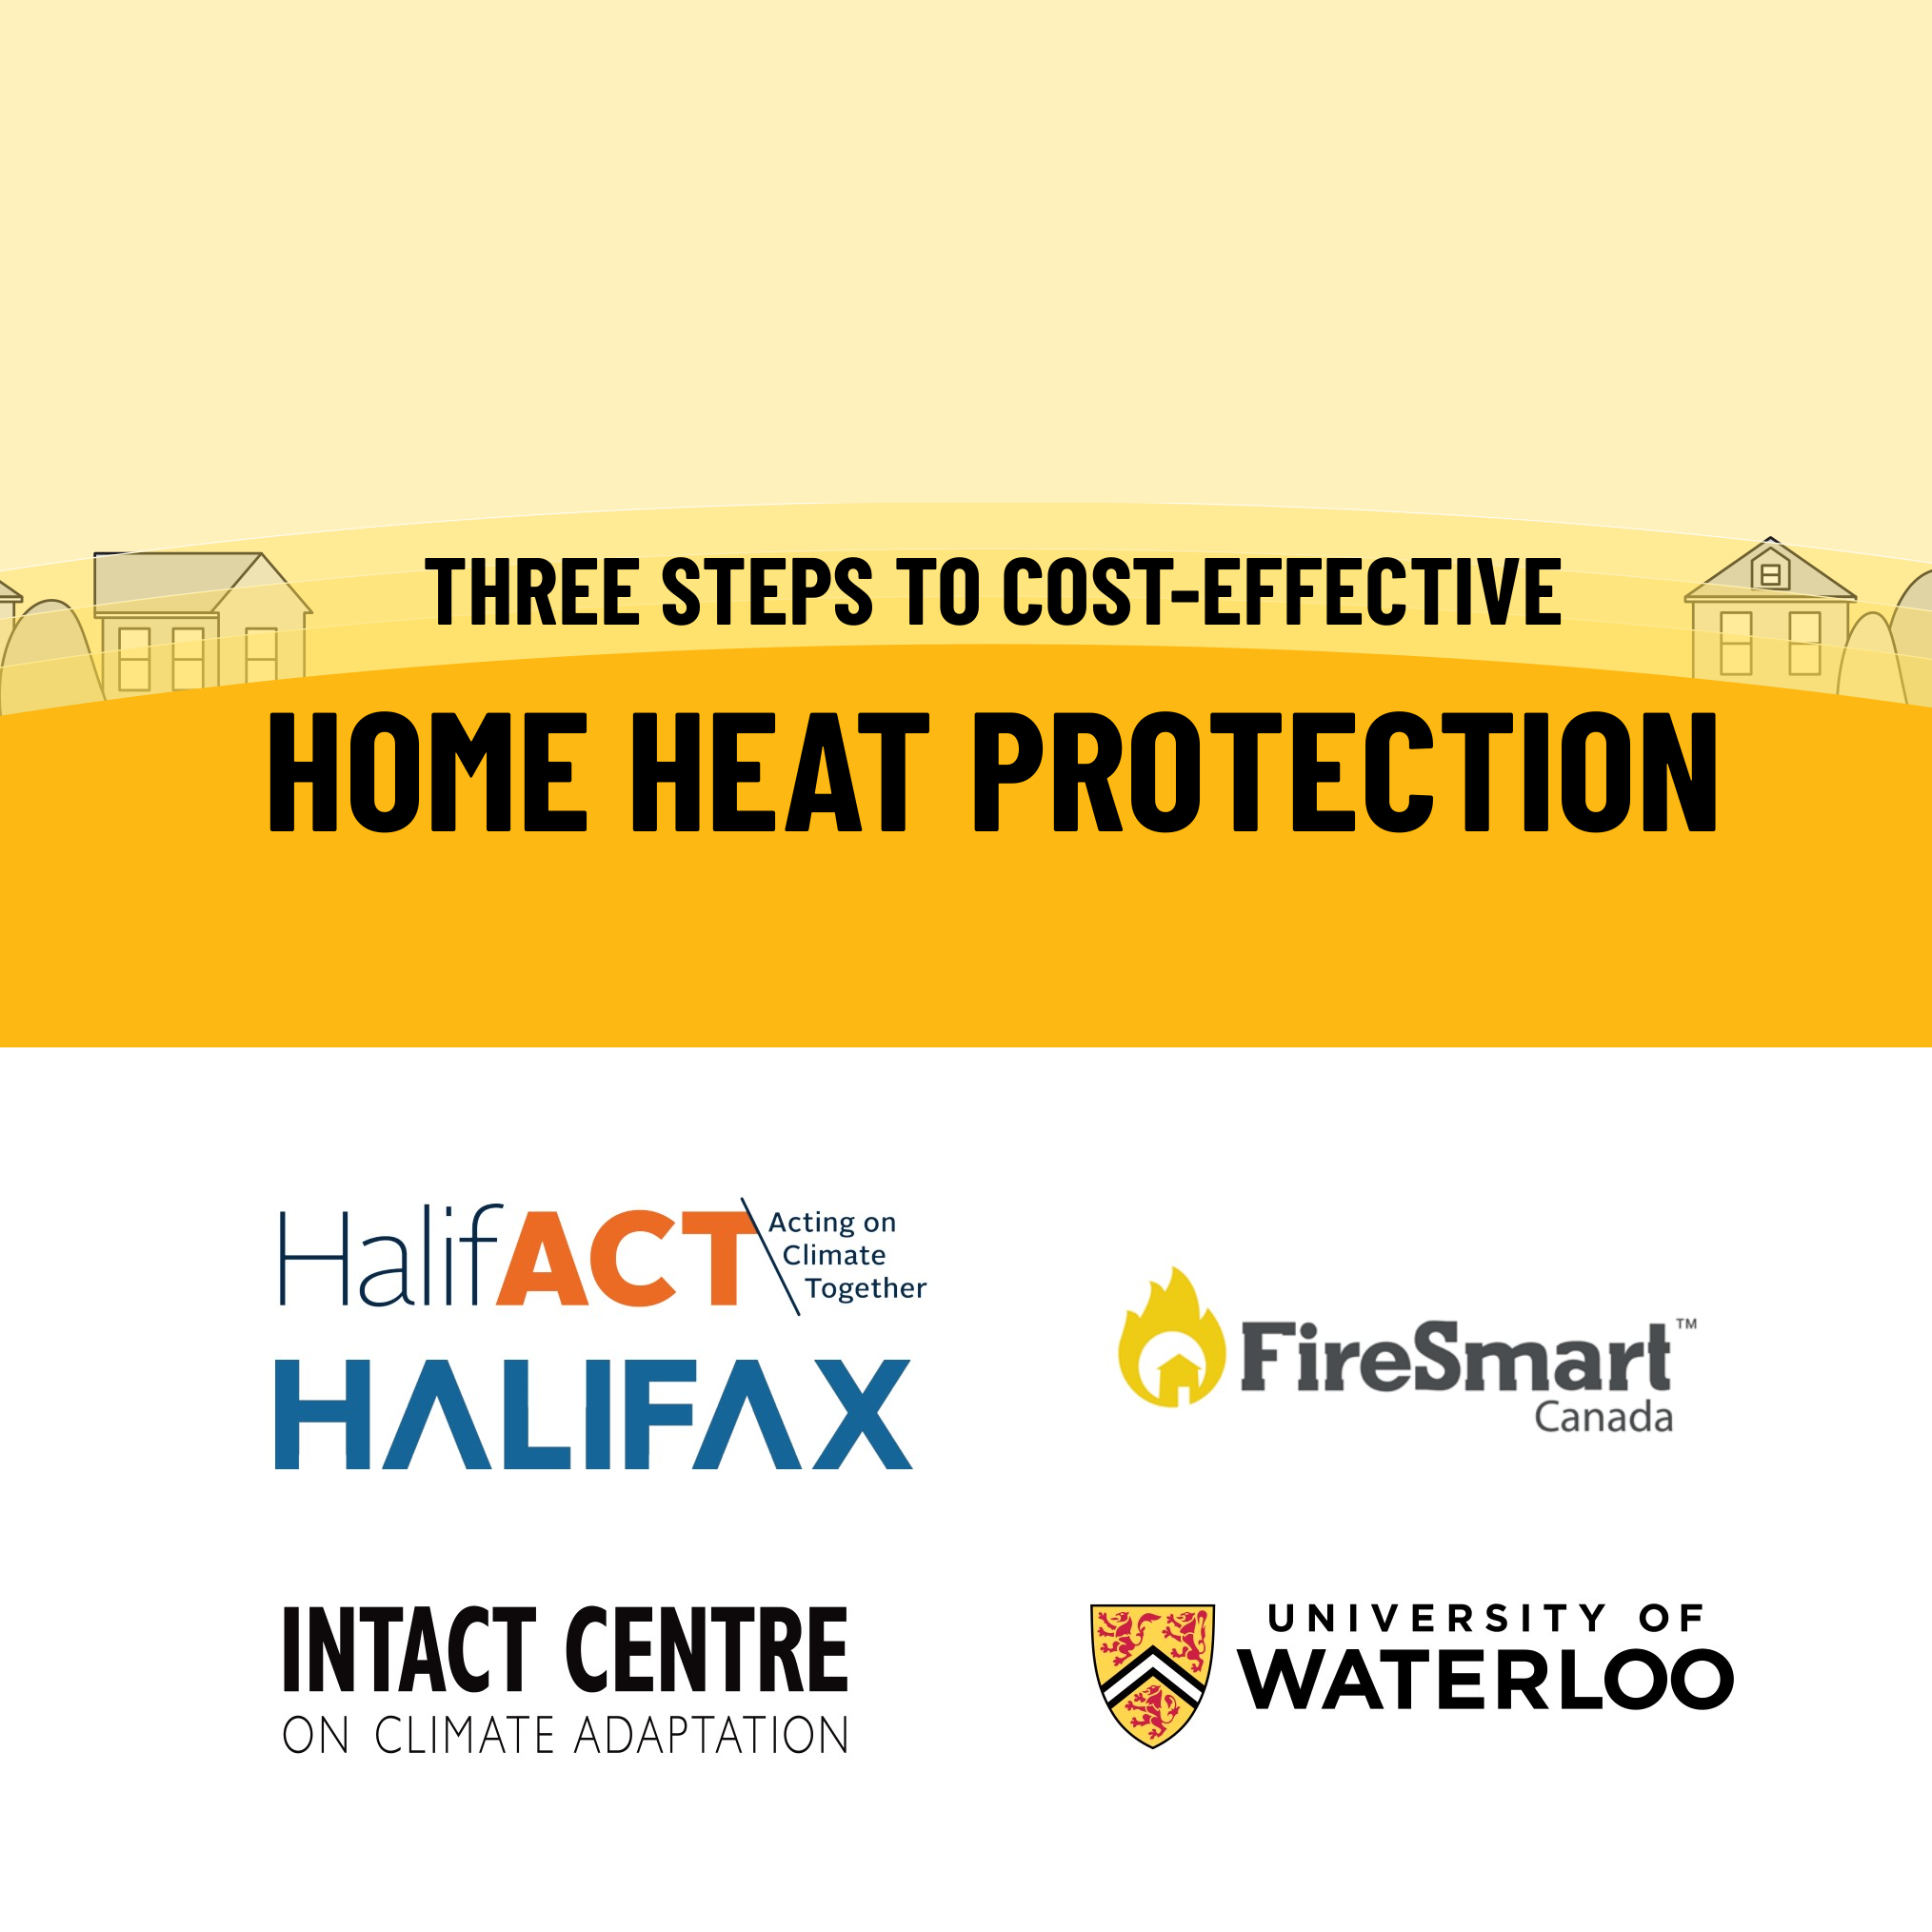 Three Steps to Cost-Effective Home Heat Protection graphic